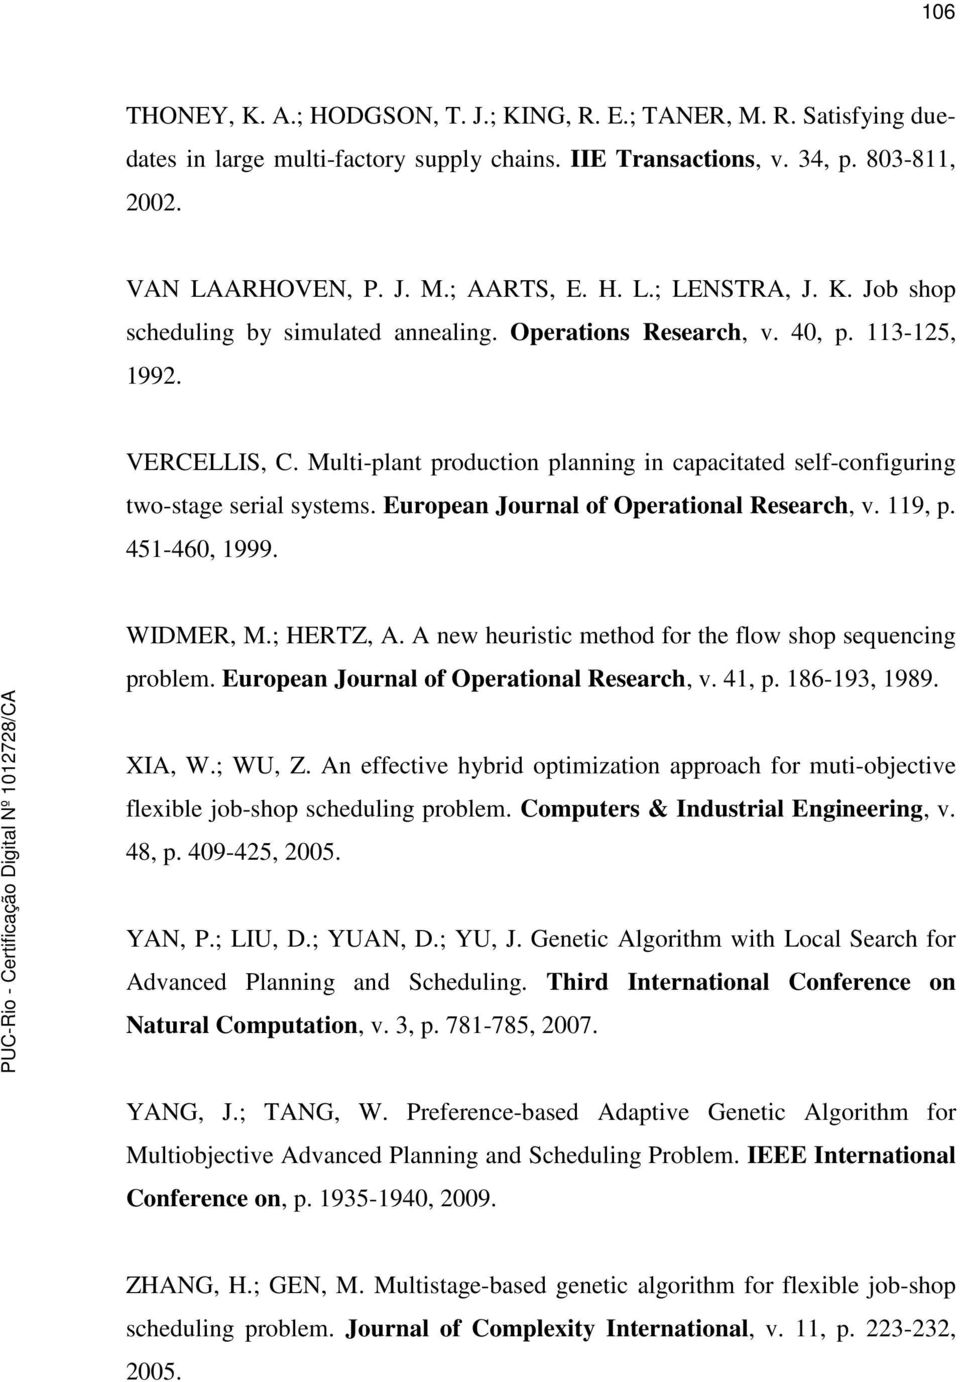 European Journal of Operational Research, v. 119, p. 451-460, 1999. WIDMER, M.; HERTZ, A. A new heuristic method for the flow shop sequencing problem. European Journal of Operational Research, v.